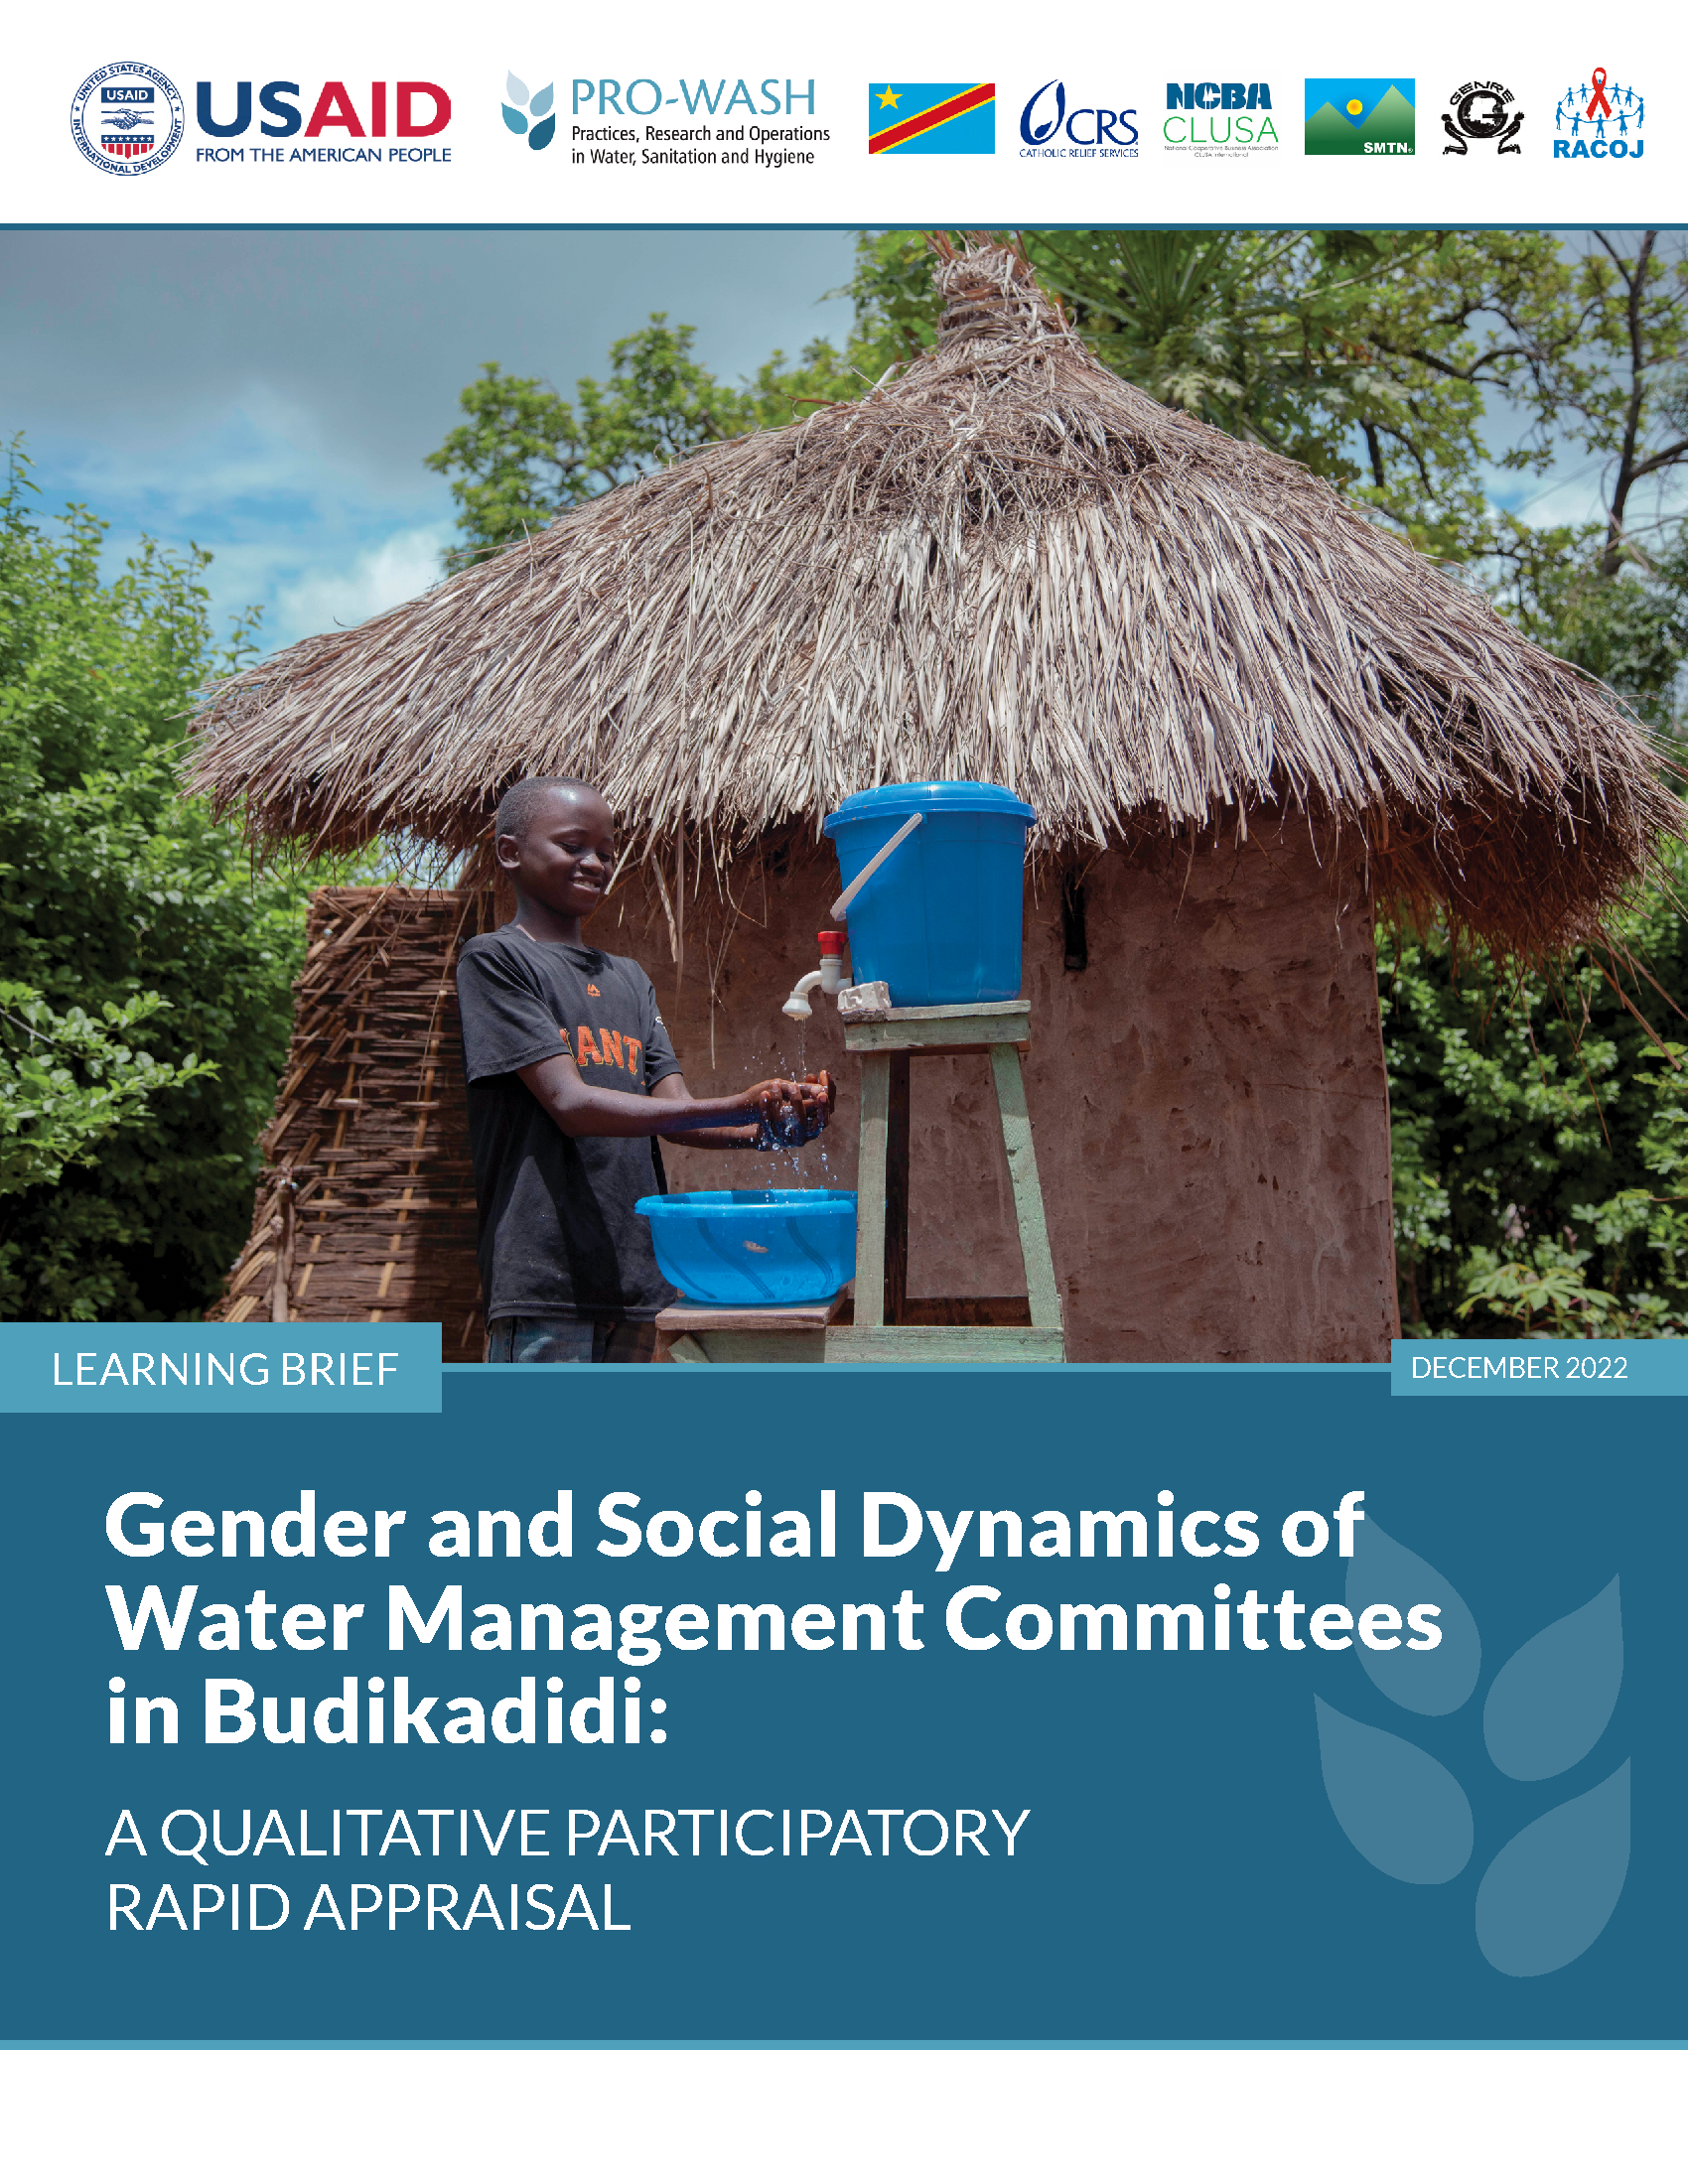 Cover page for Gender and Social Dynamics of Water Management Committees in Budikadidi: A Qualitative Participatory Rapid Appraisal